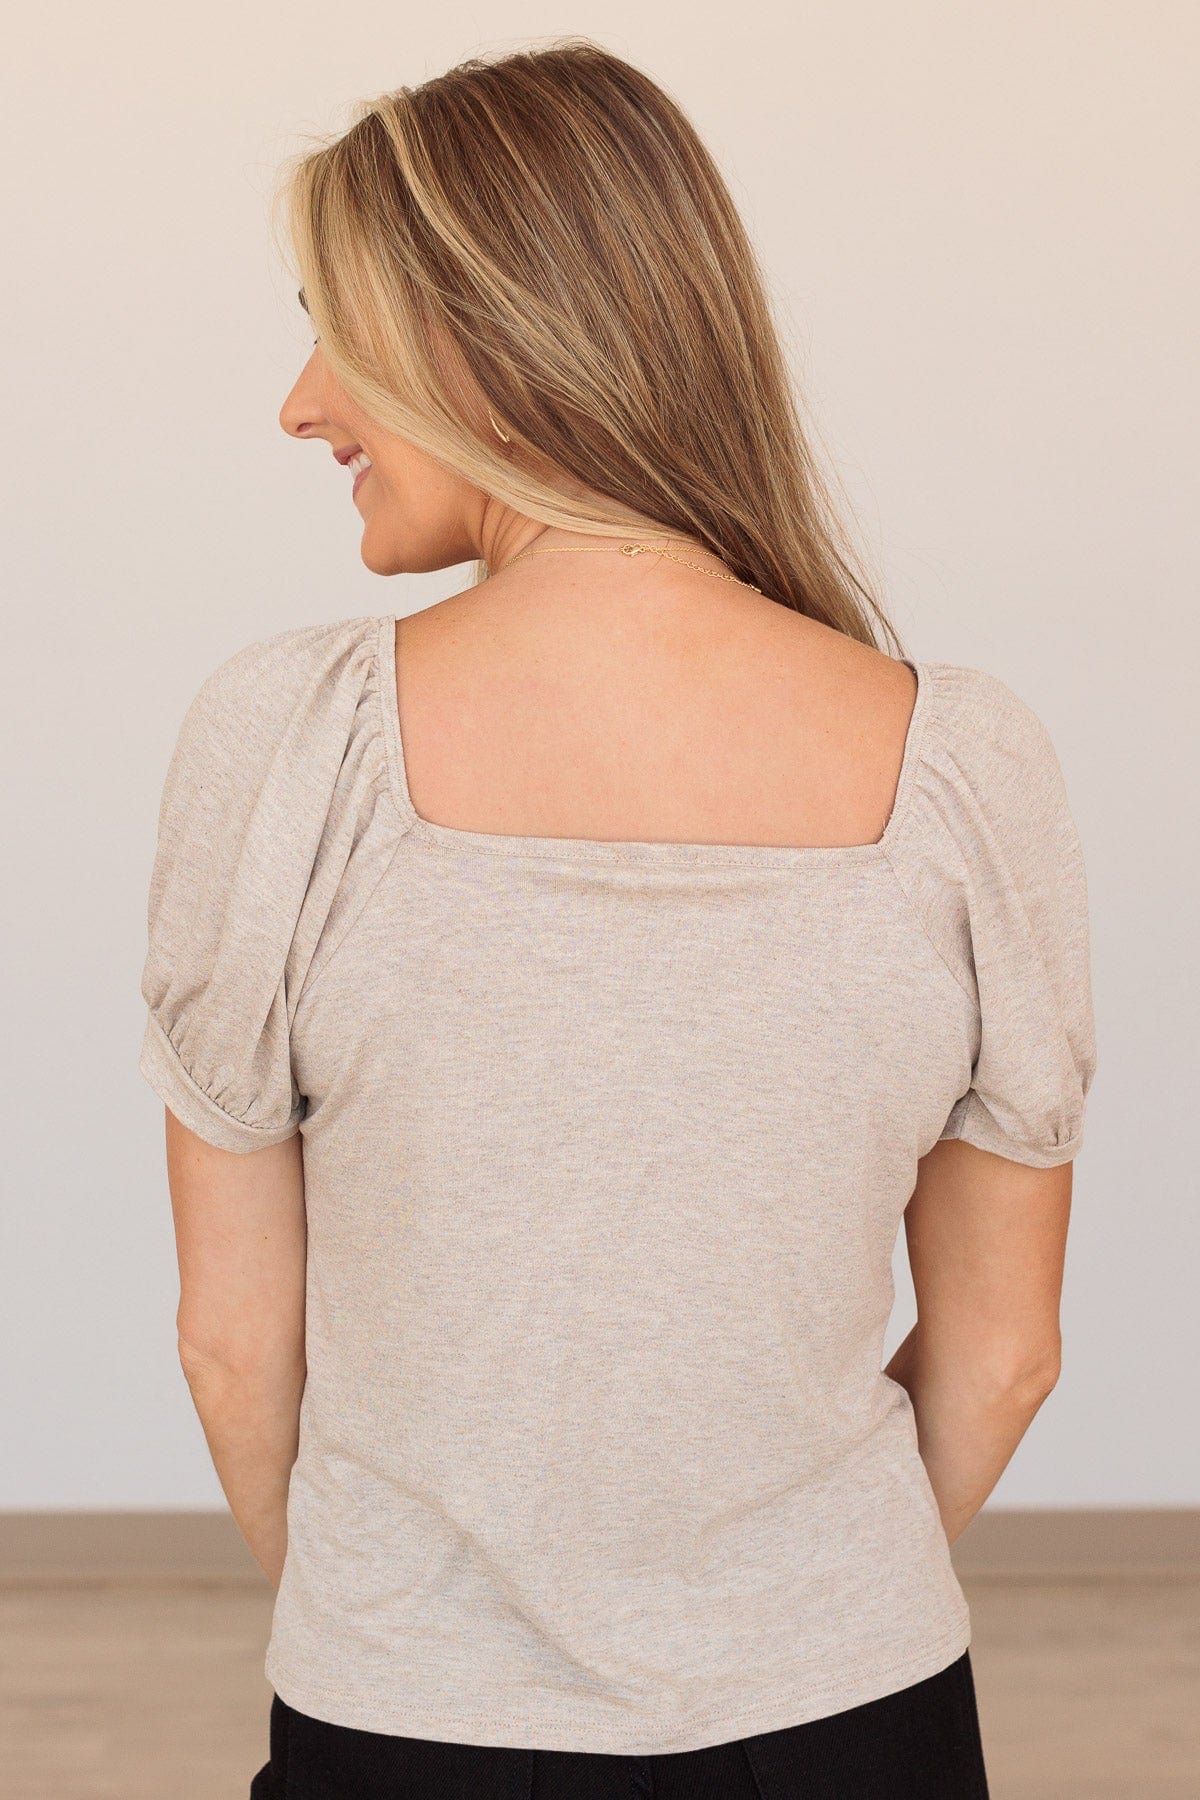 No Bad Thoughts Here Button Top- Taupe